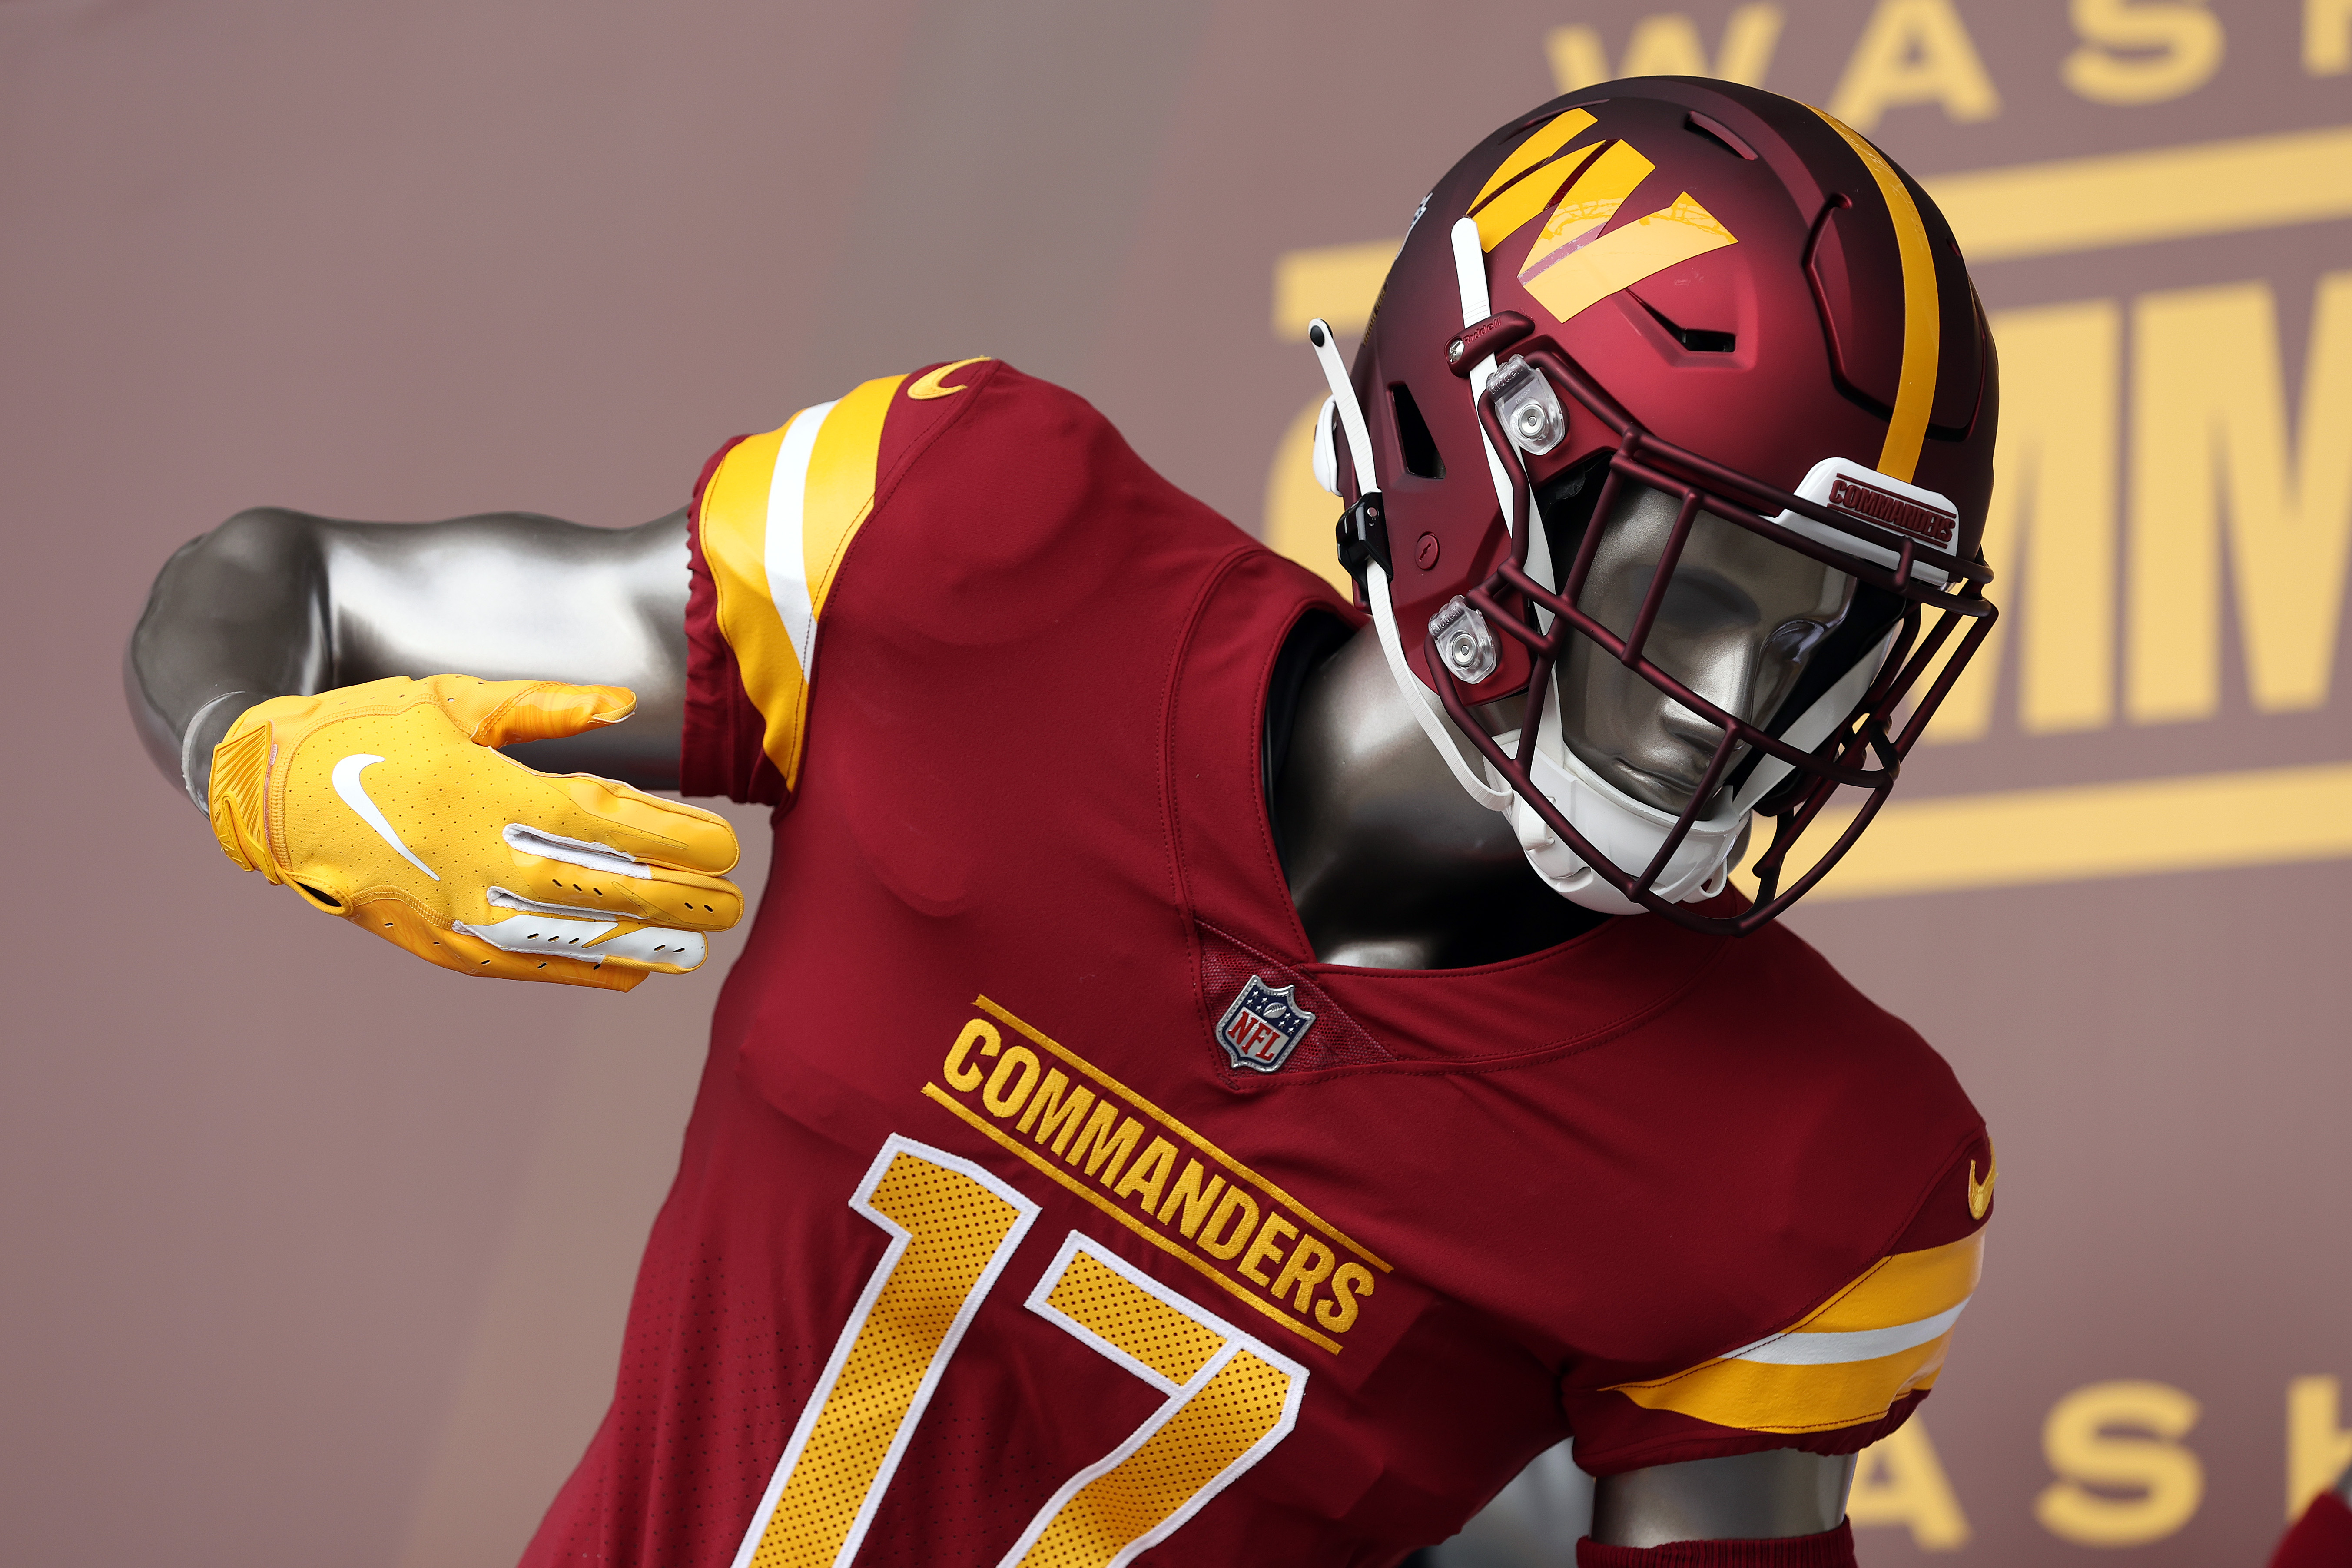 Washington Commanders gear: Here's how to get new jerseys, shirts, hats 